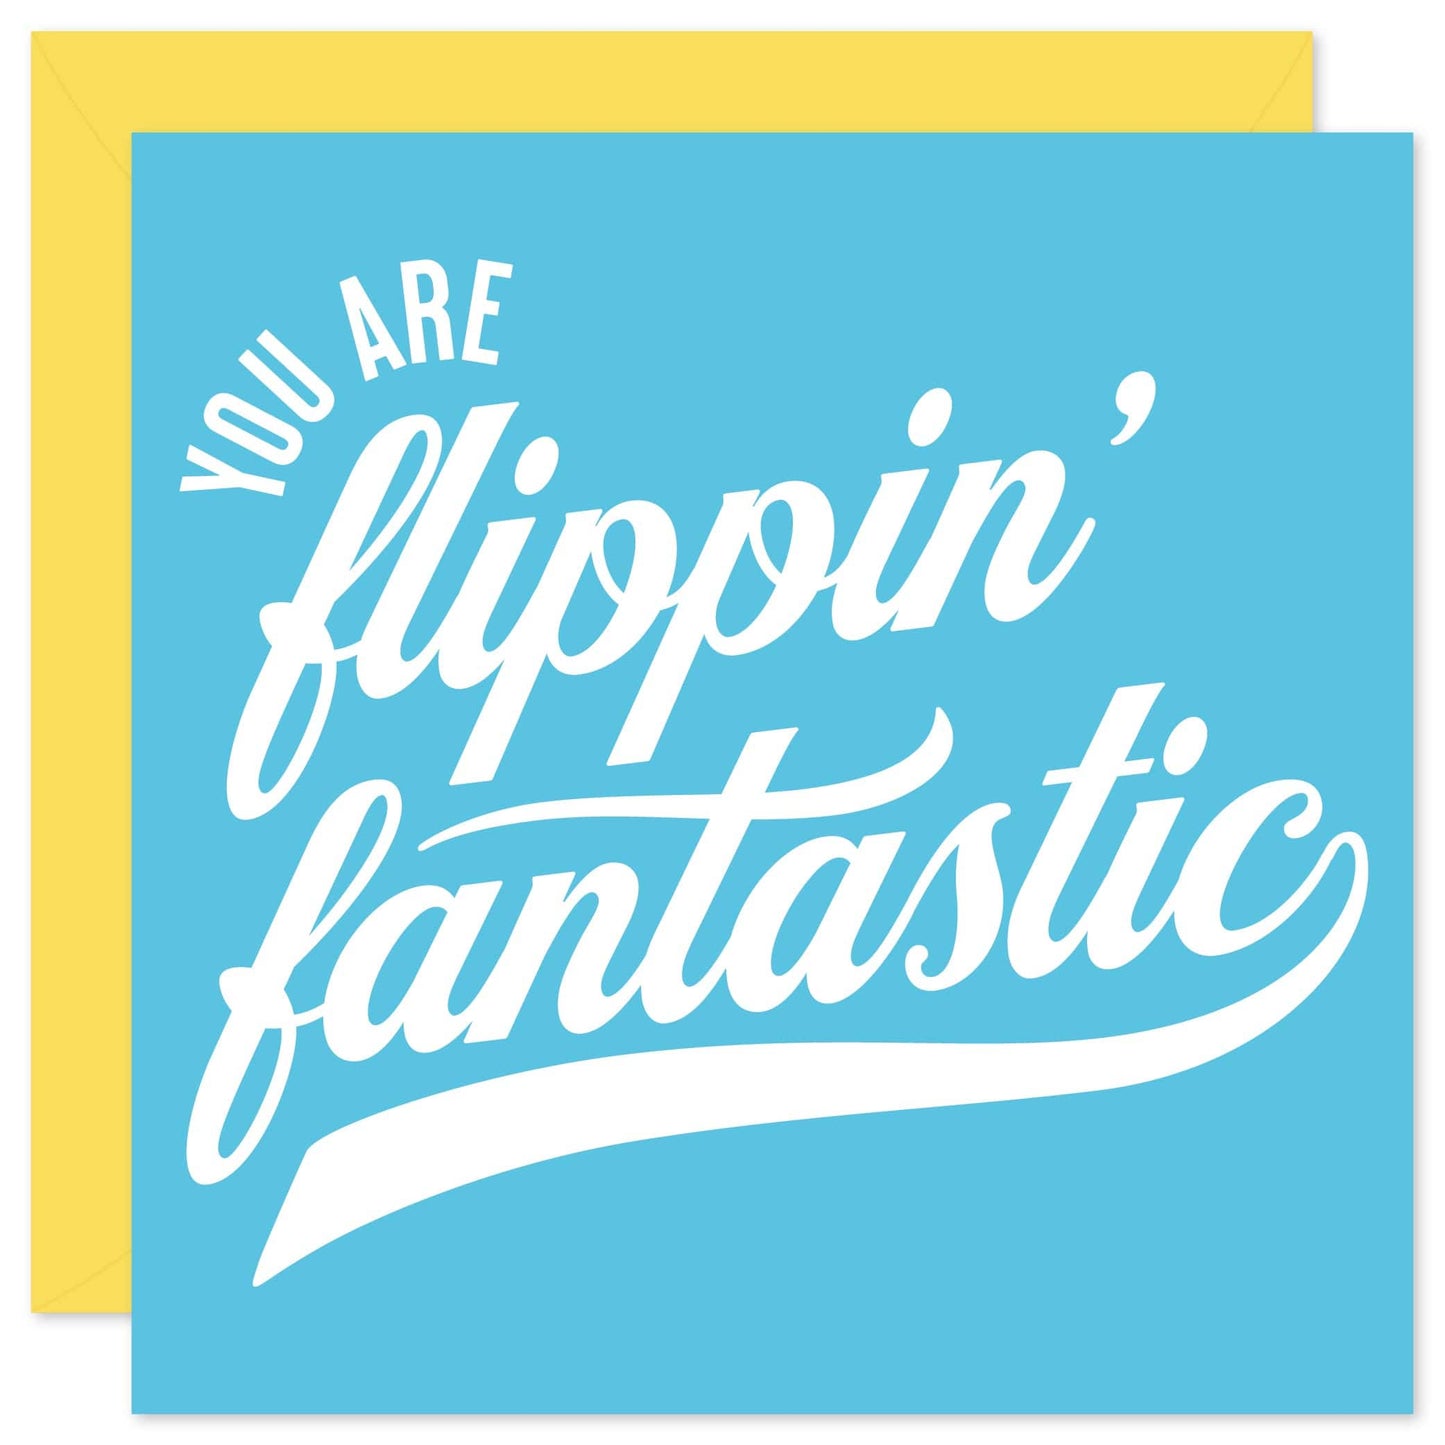 You are flippin' fantastic greeting card from Purple Tree Designs